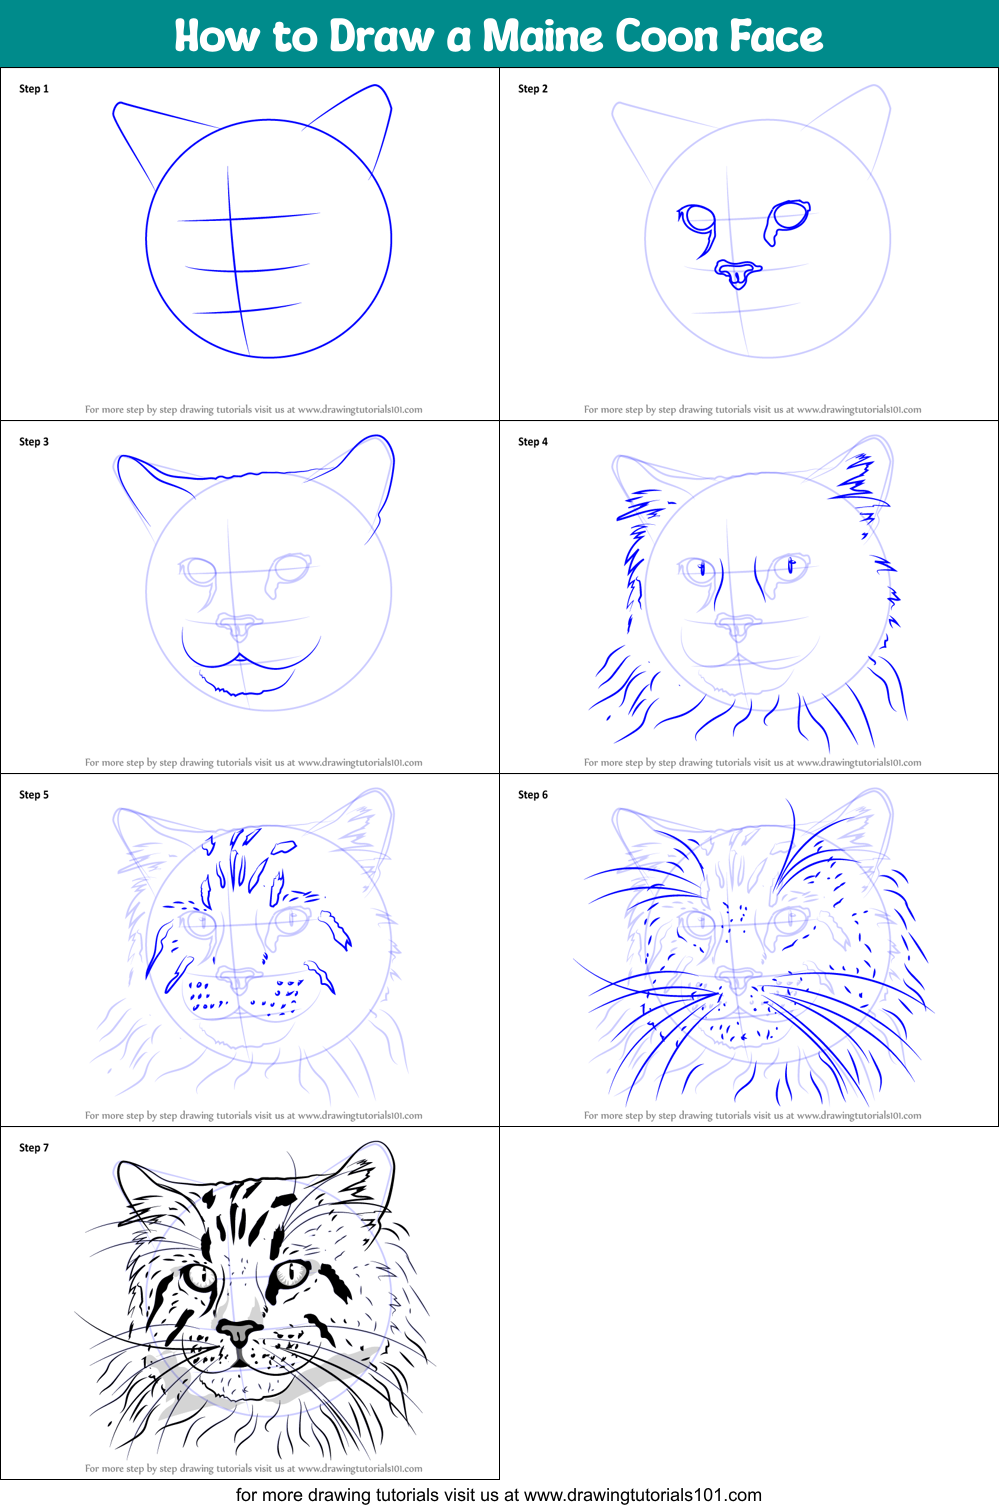 How to Draw a Maine Coon Face (Cats) Step by Step | DrawingTutorials101.com